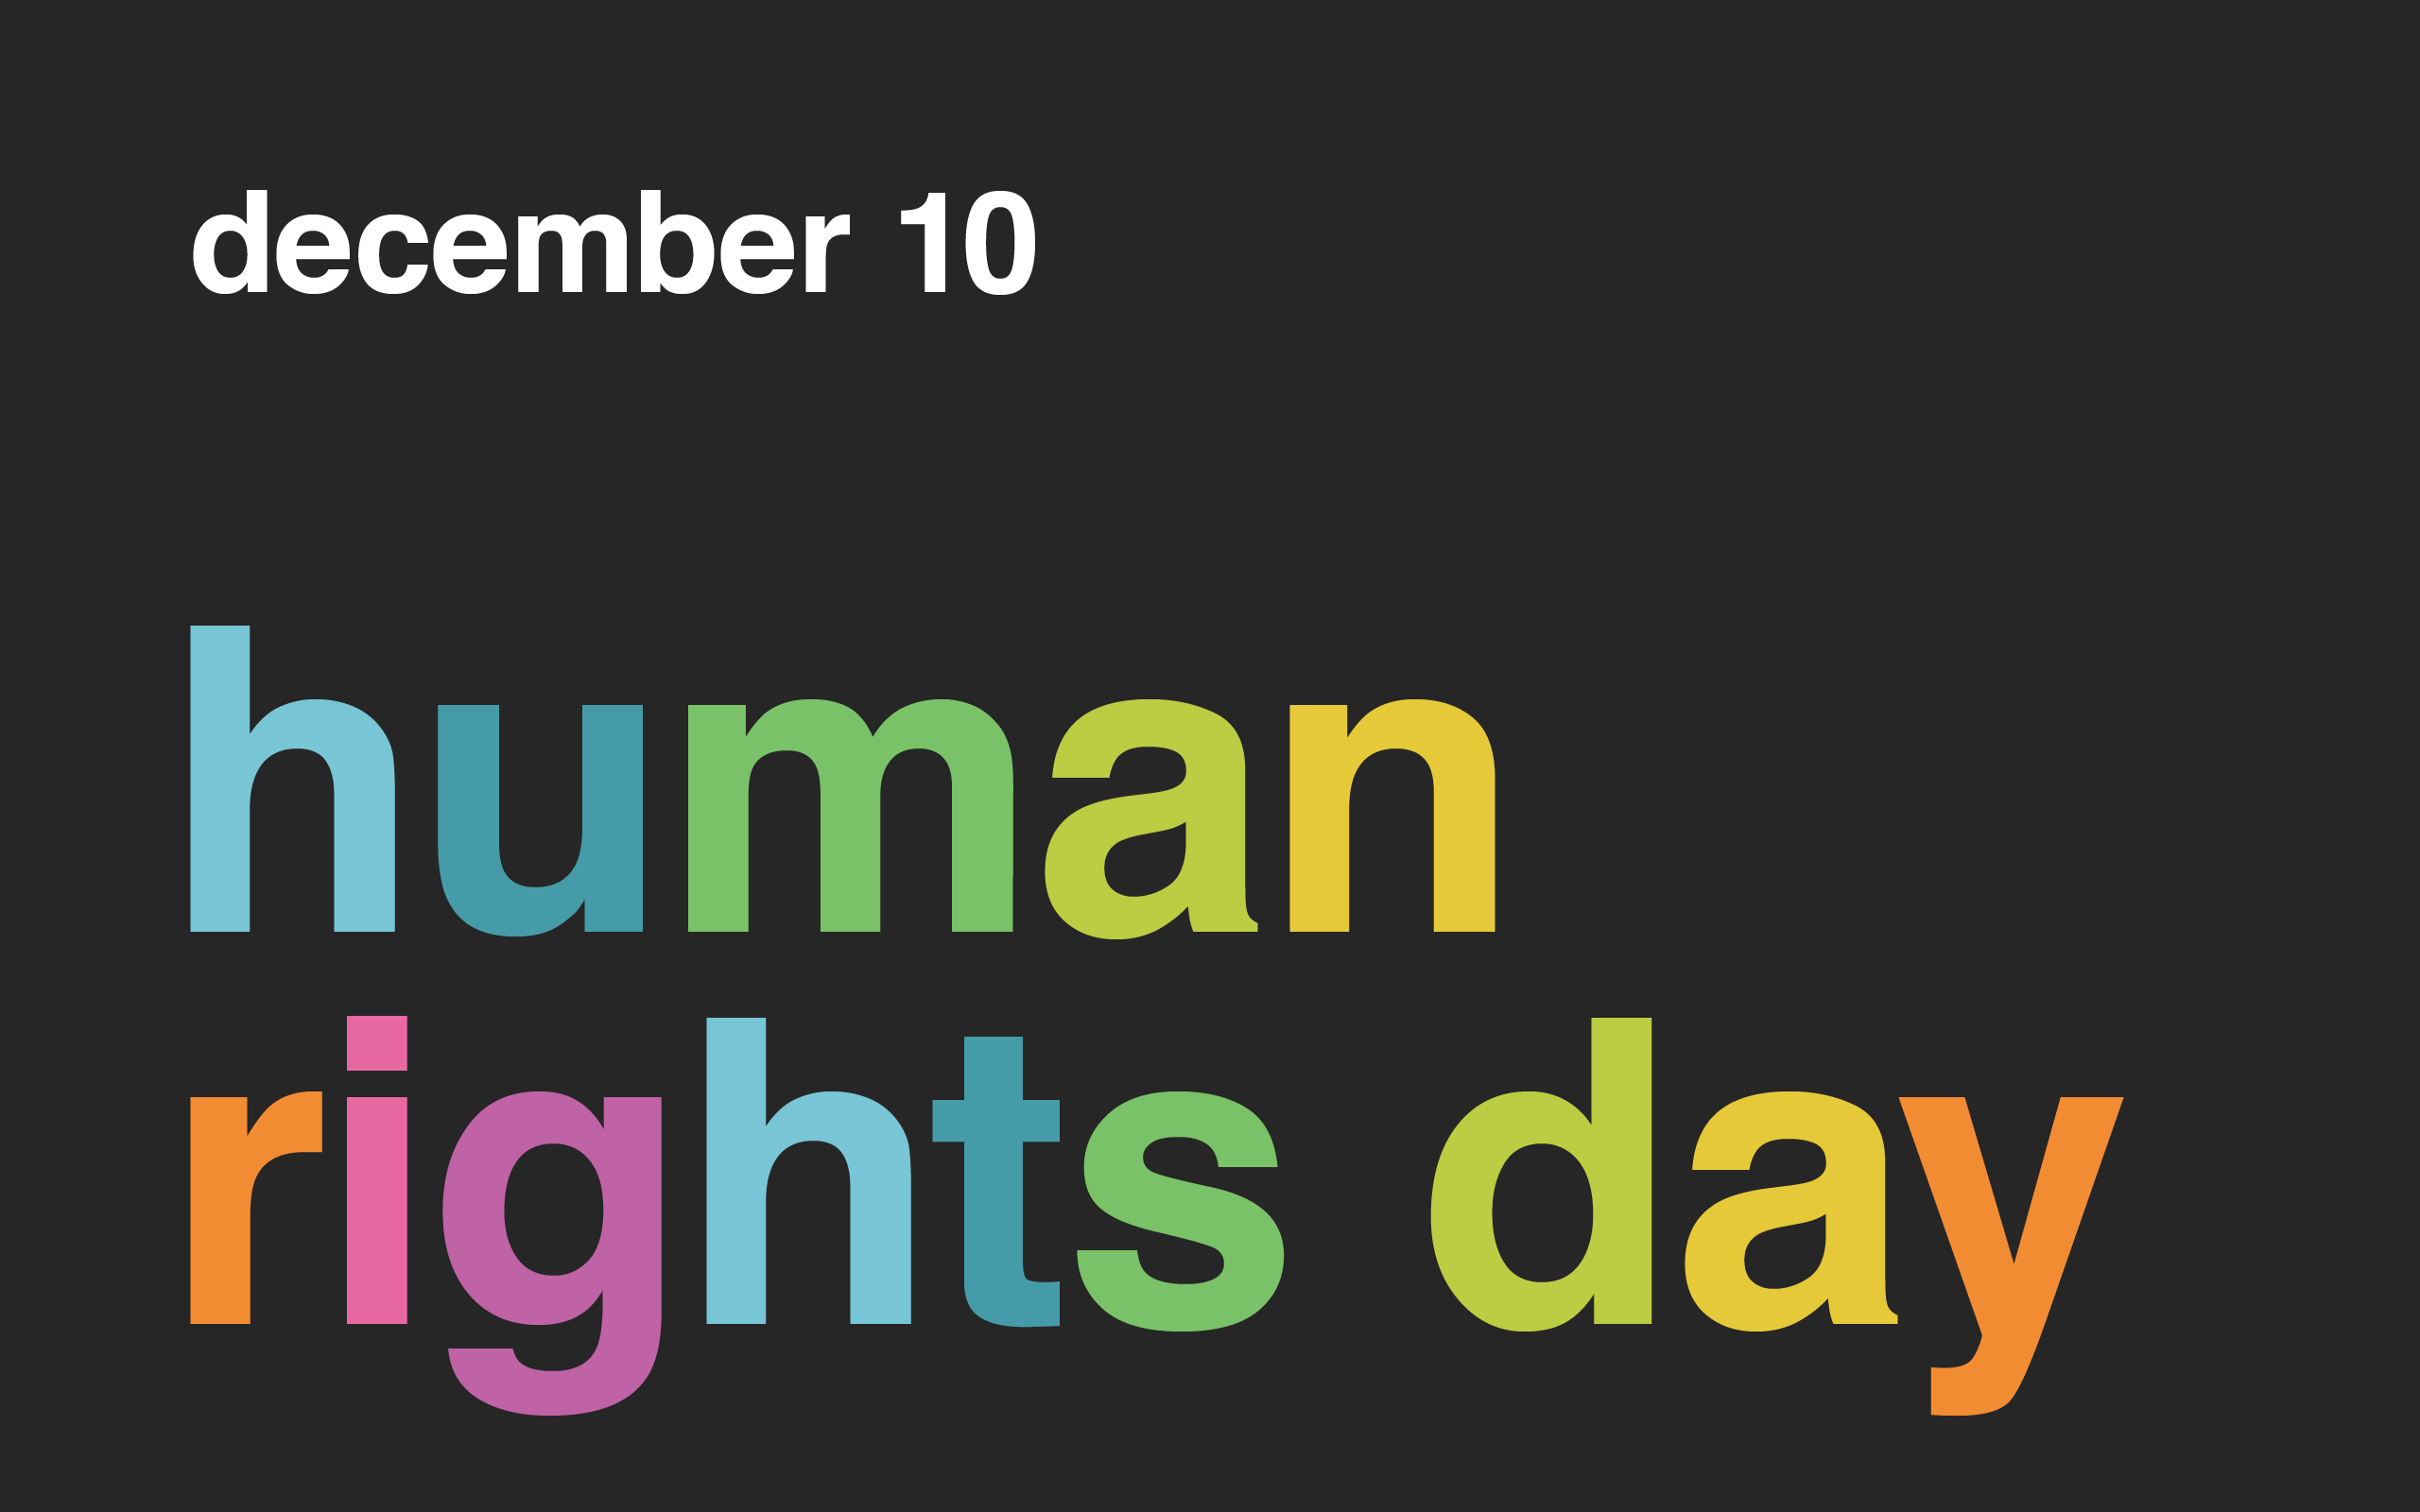 December 10 Human Rights Day